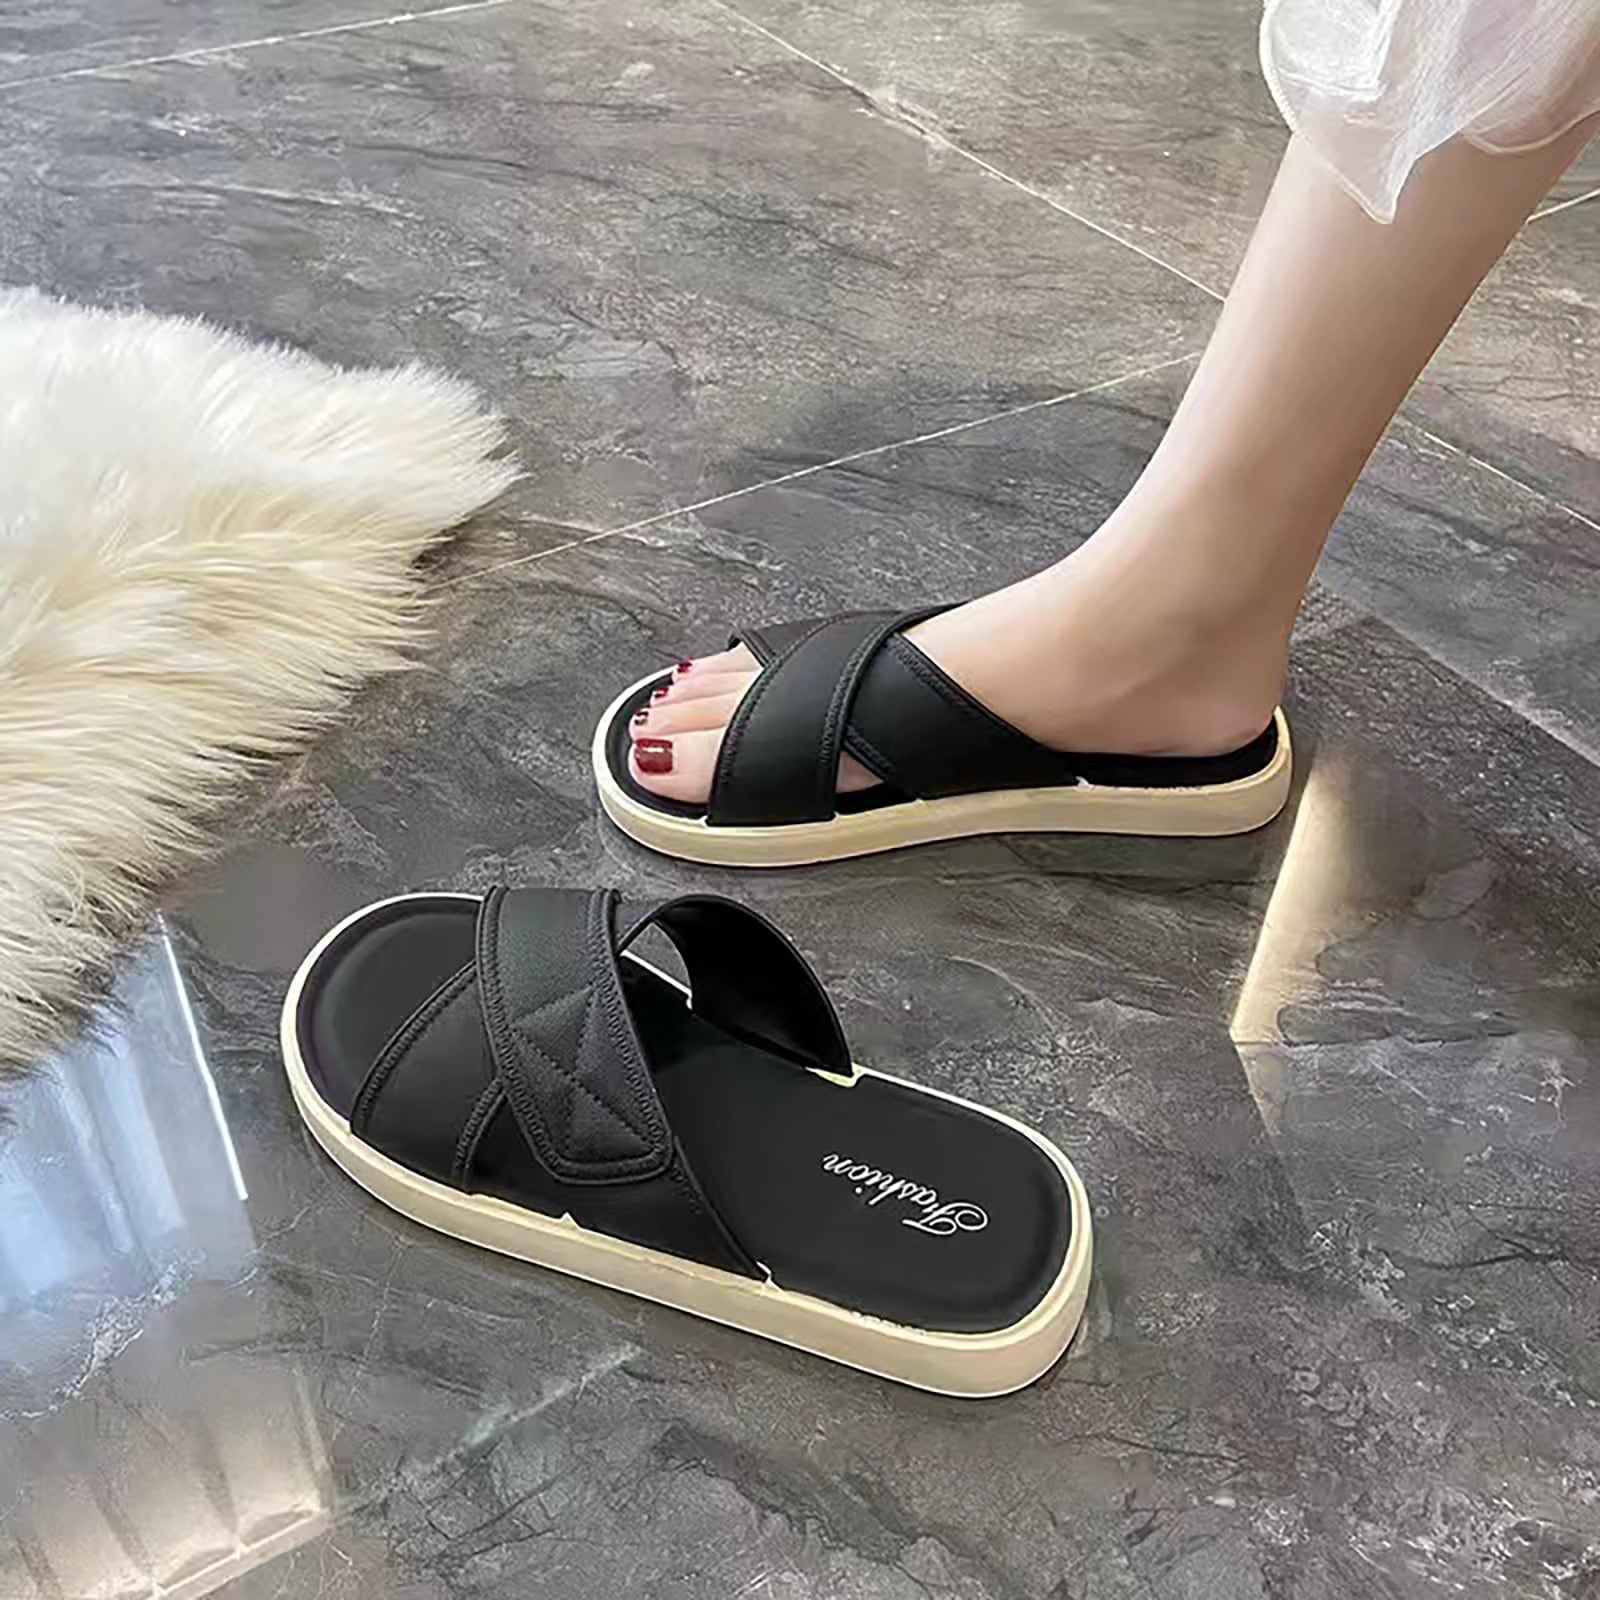 New Arrival Fashionable Simple Elegant Slippers For Home, Bathroom And Outdoor With Soft Pvc Slip-Resistant Bottom, Suitable For Indoor And Outdoor Wear, Fashion Style-Black-11